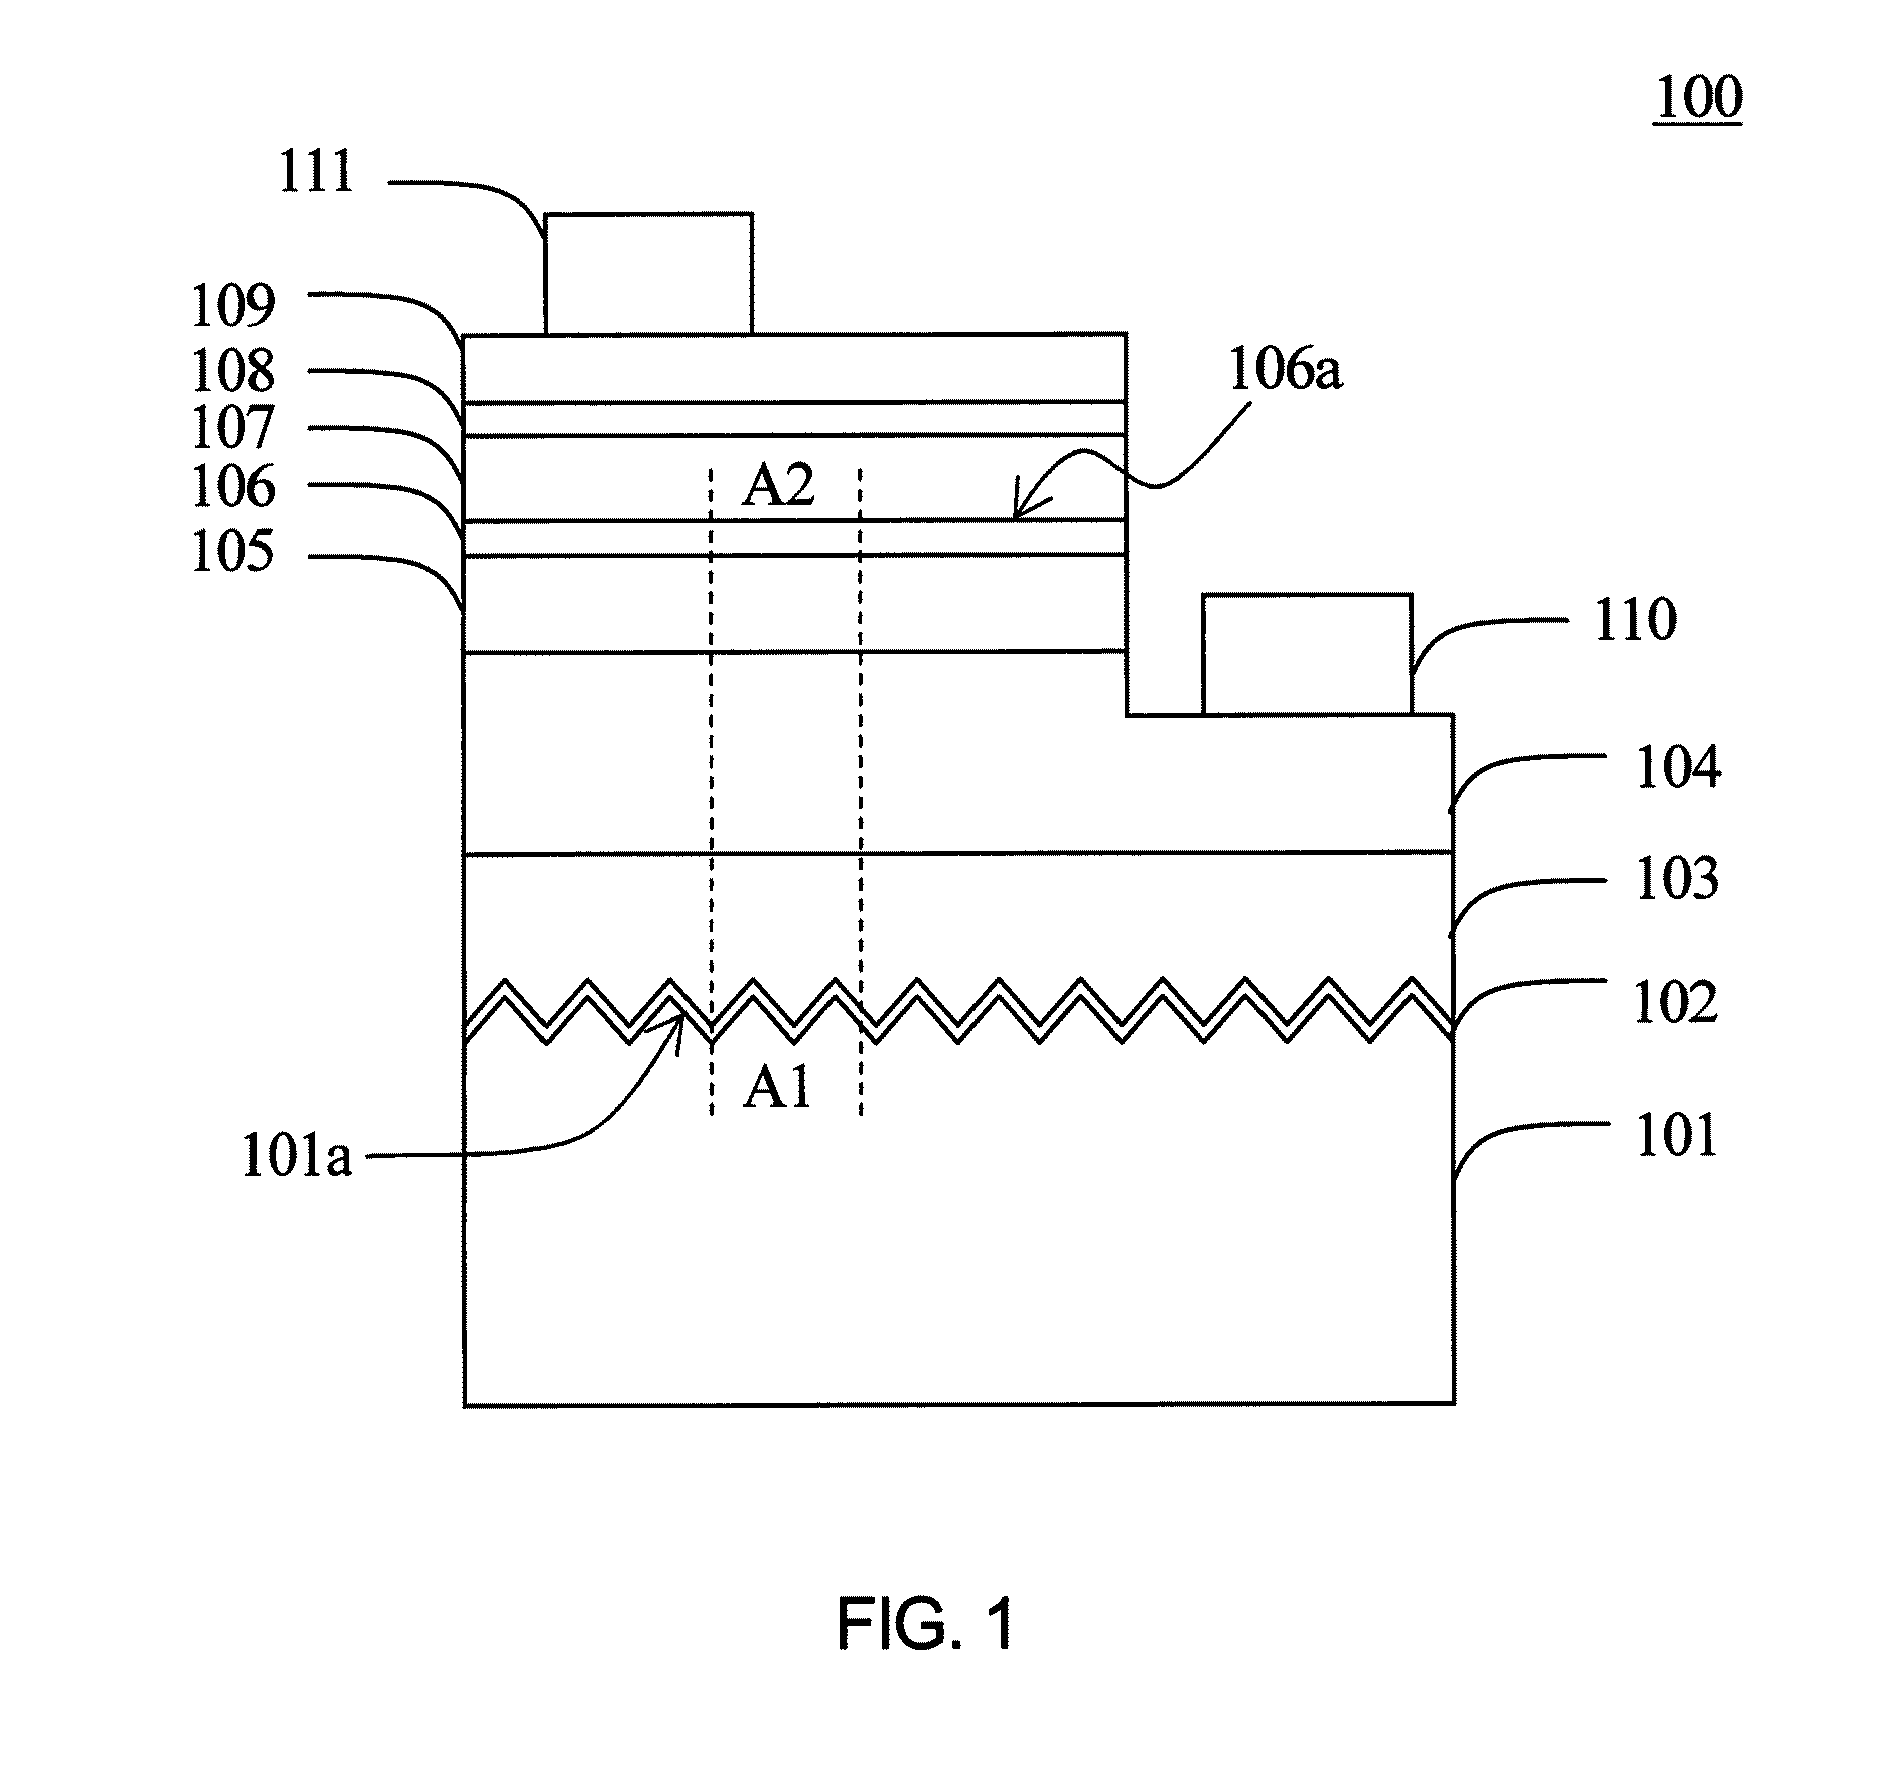 Light-emitting device having a patterned surface